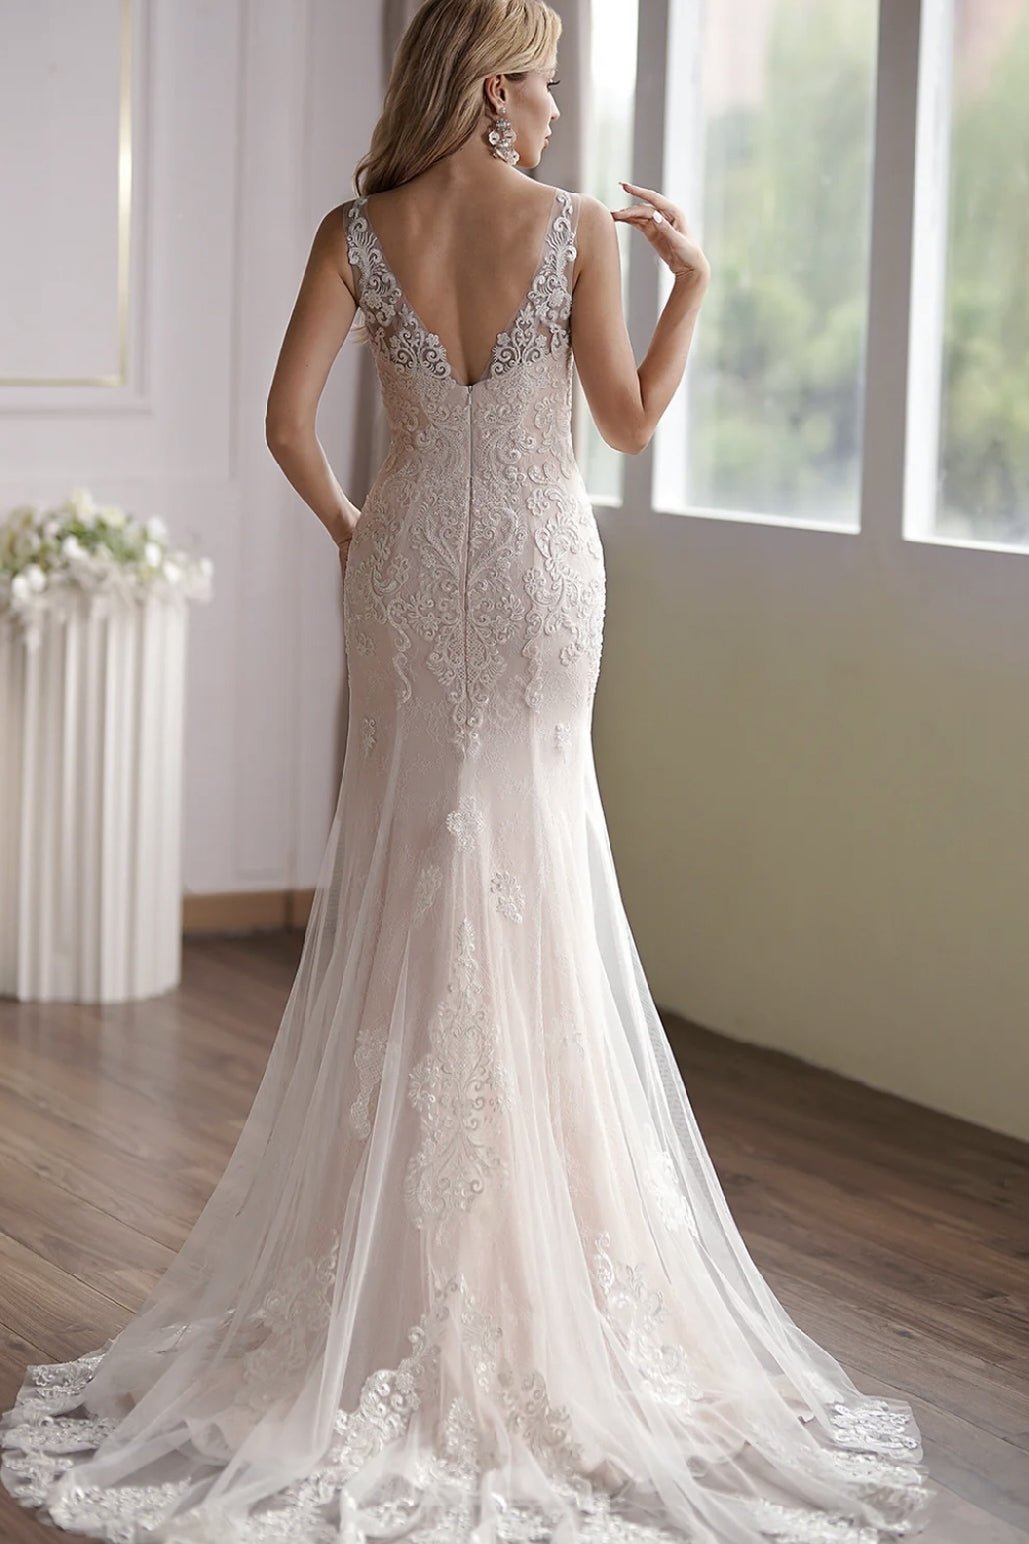 Luxurious Blush V-Neck Embroidery Straps Sleeveless Beaded Mermaid Bridal Gown